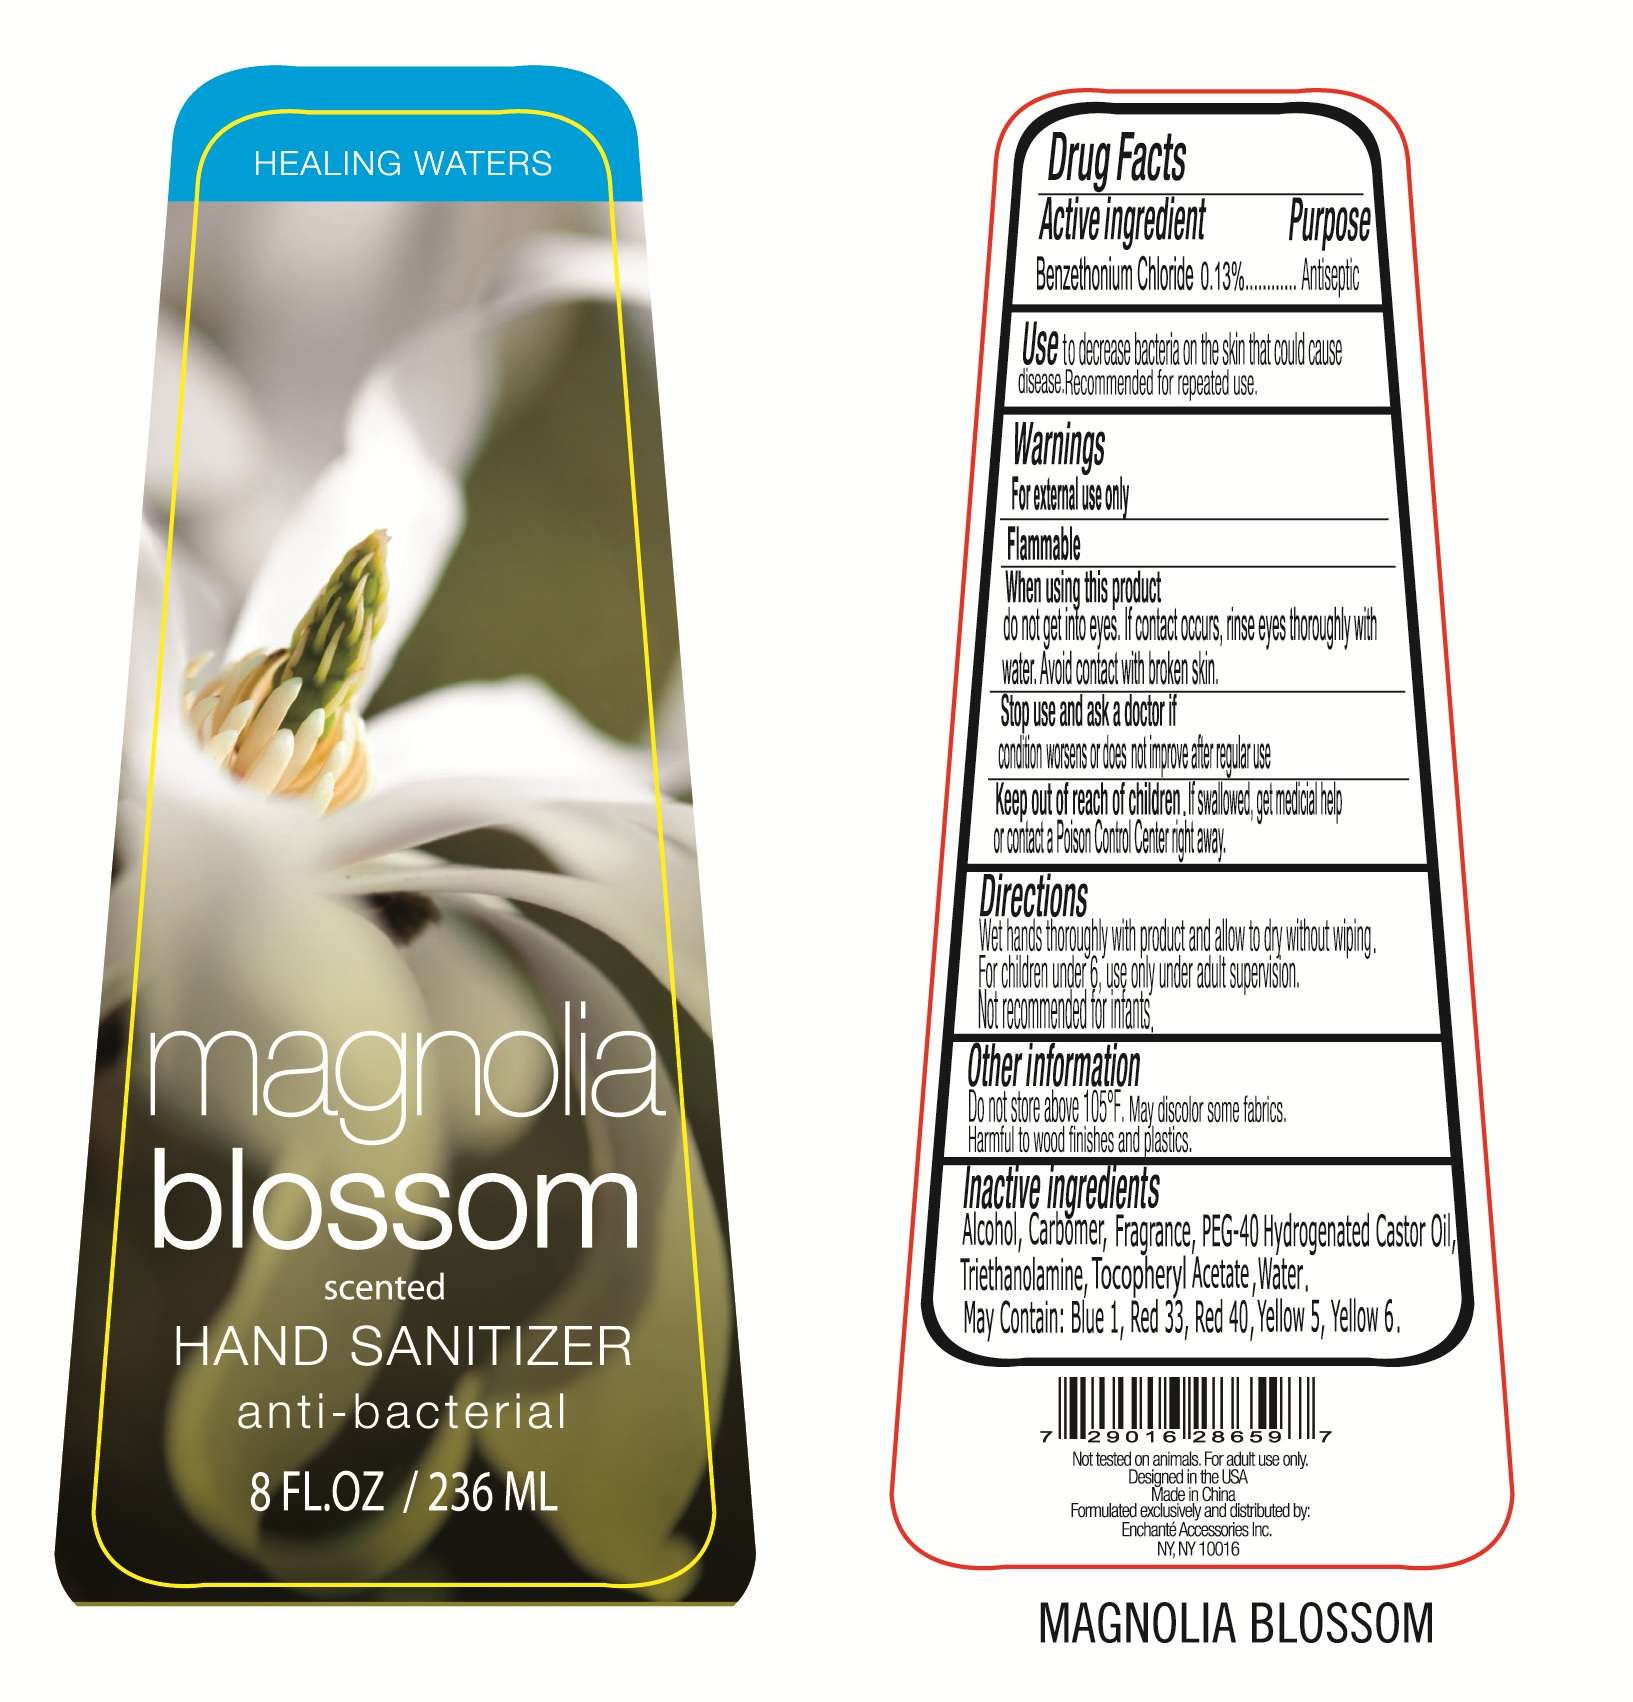 Magnolia Blossom Scented Hand Sanitizer Anti-Bacterial